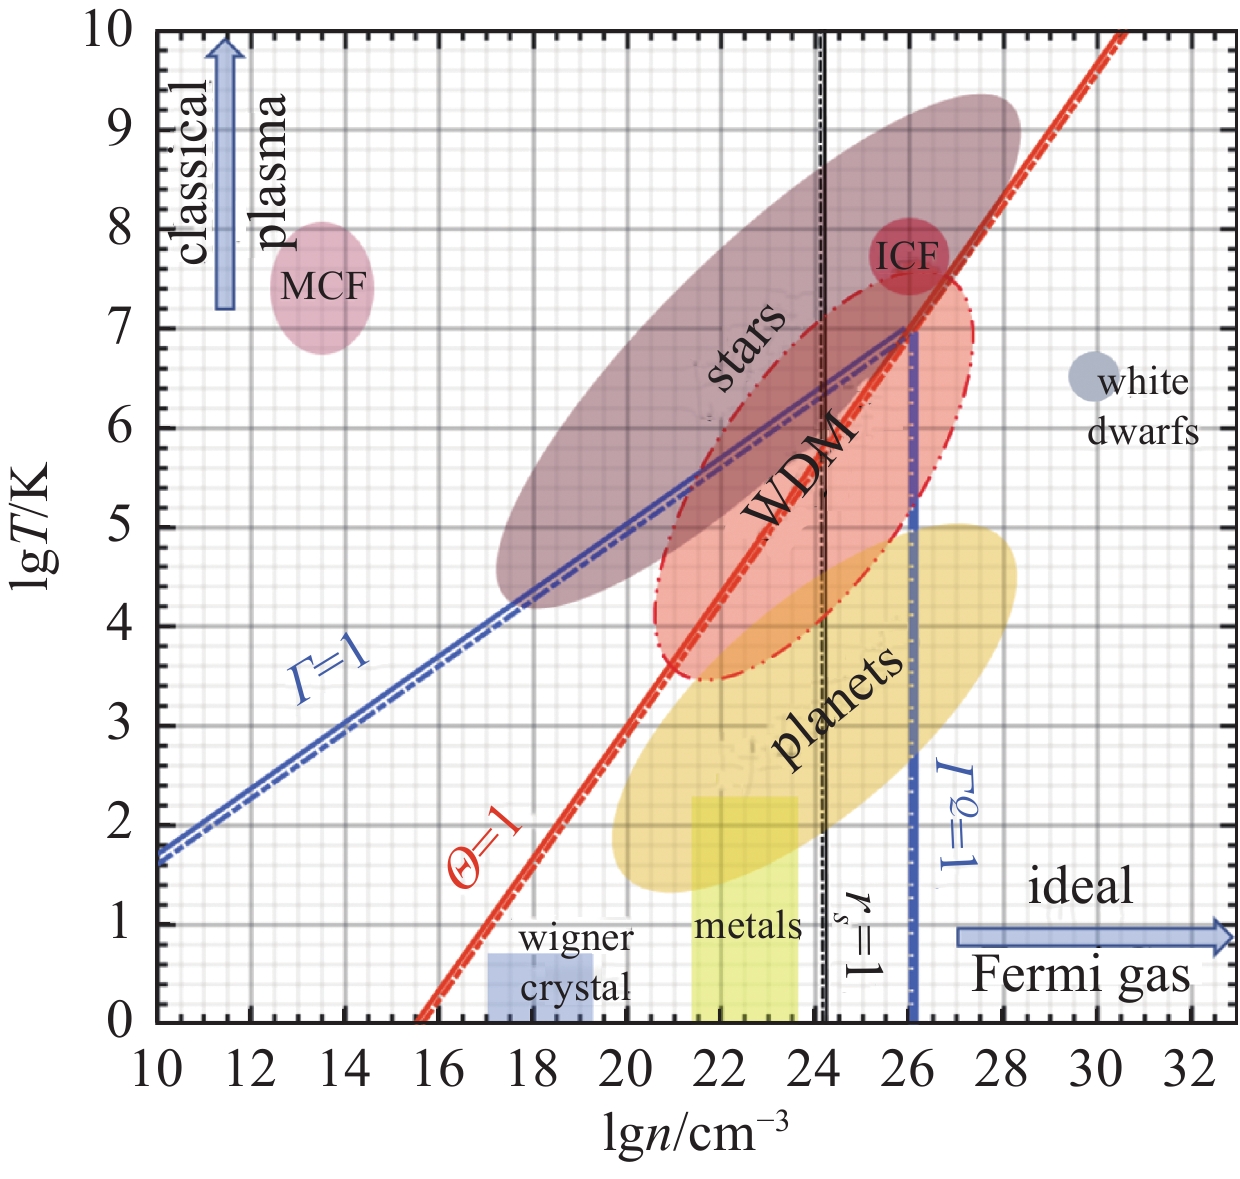 Density-temperature plane with examples of matters and characteristic parameters. ICF denotes inertial confinement fusion. MCF denotes magnetic confinement fusion. Metals refer to the electron gas in metals. The parameter interval of WDM partially overlaps with the parameter intervals of planets and stars